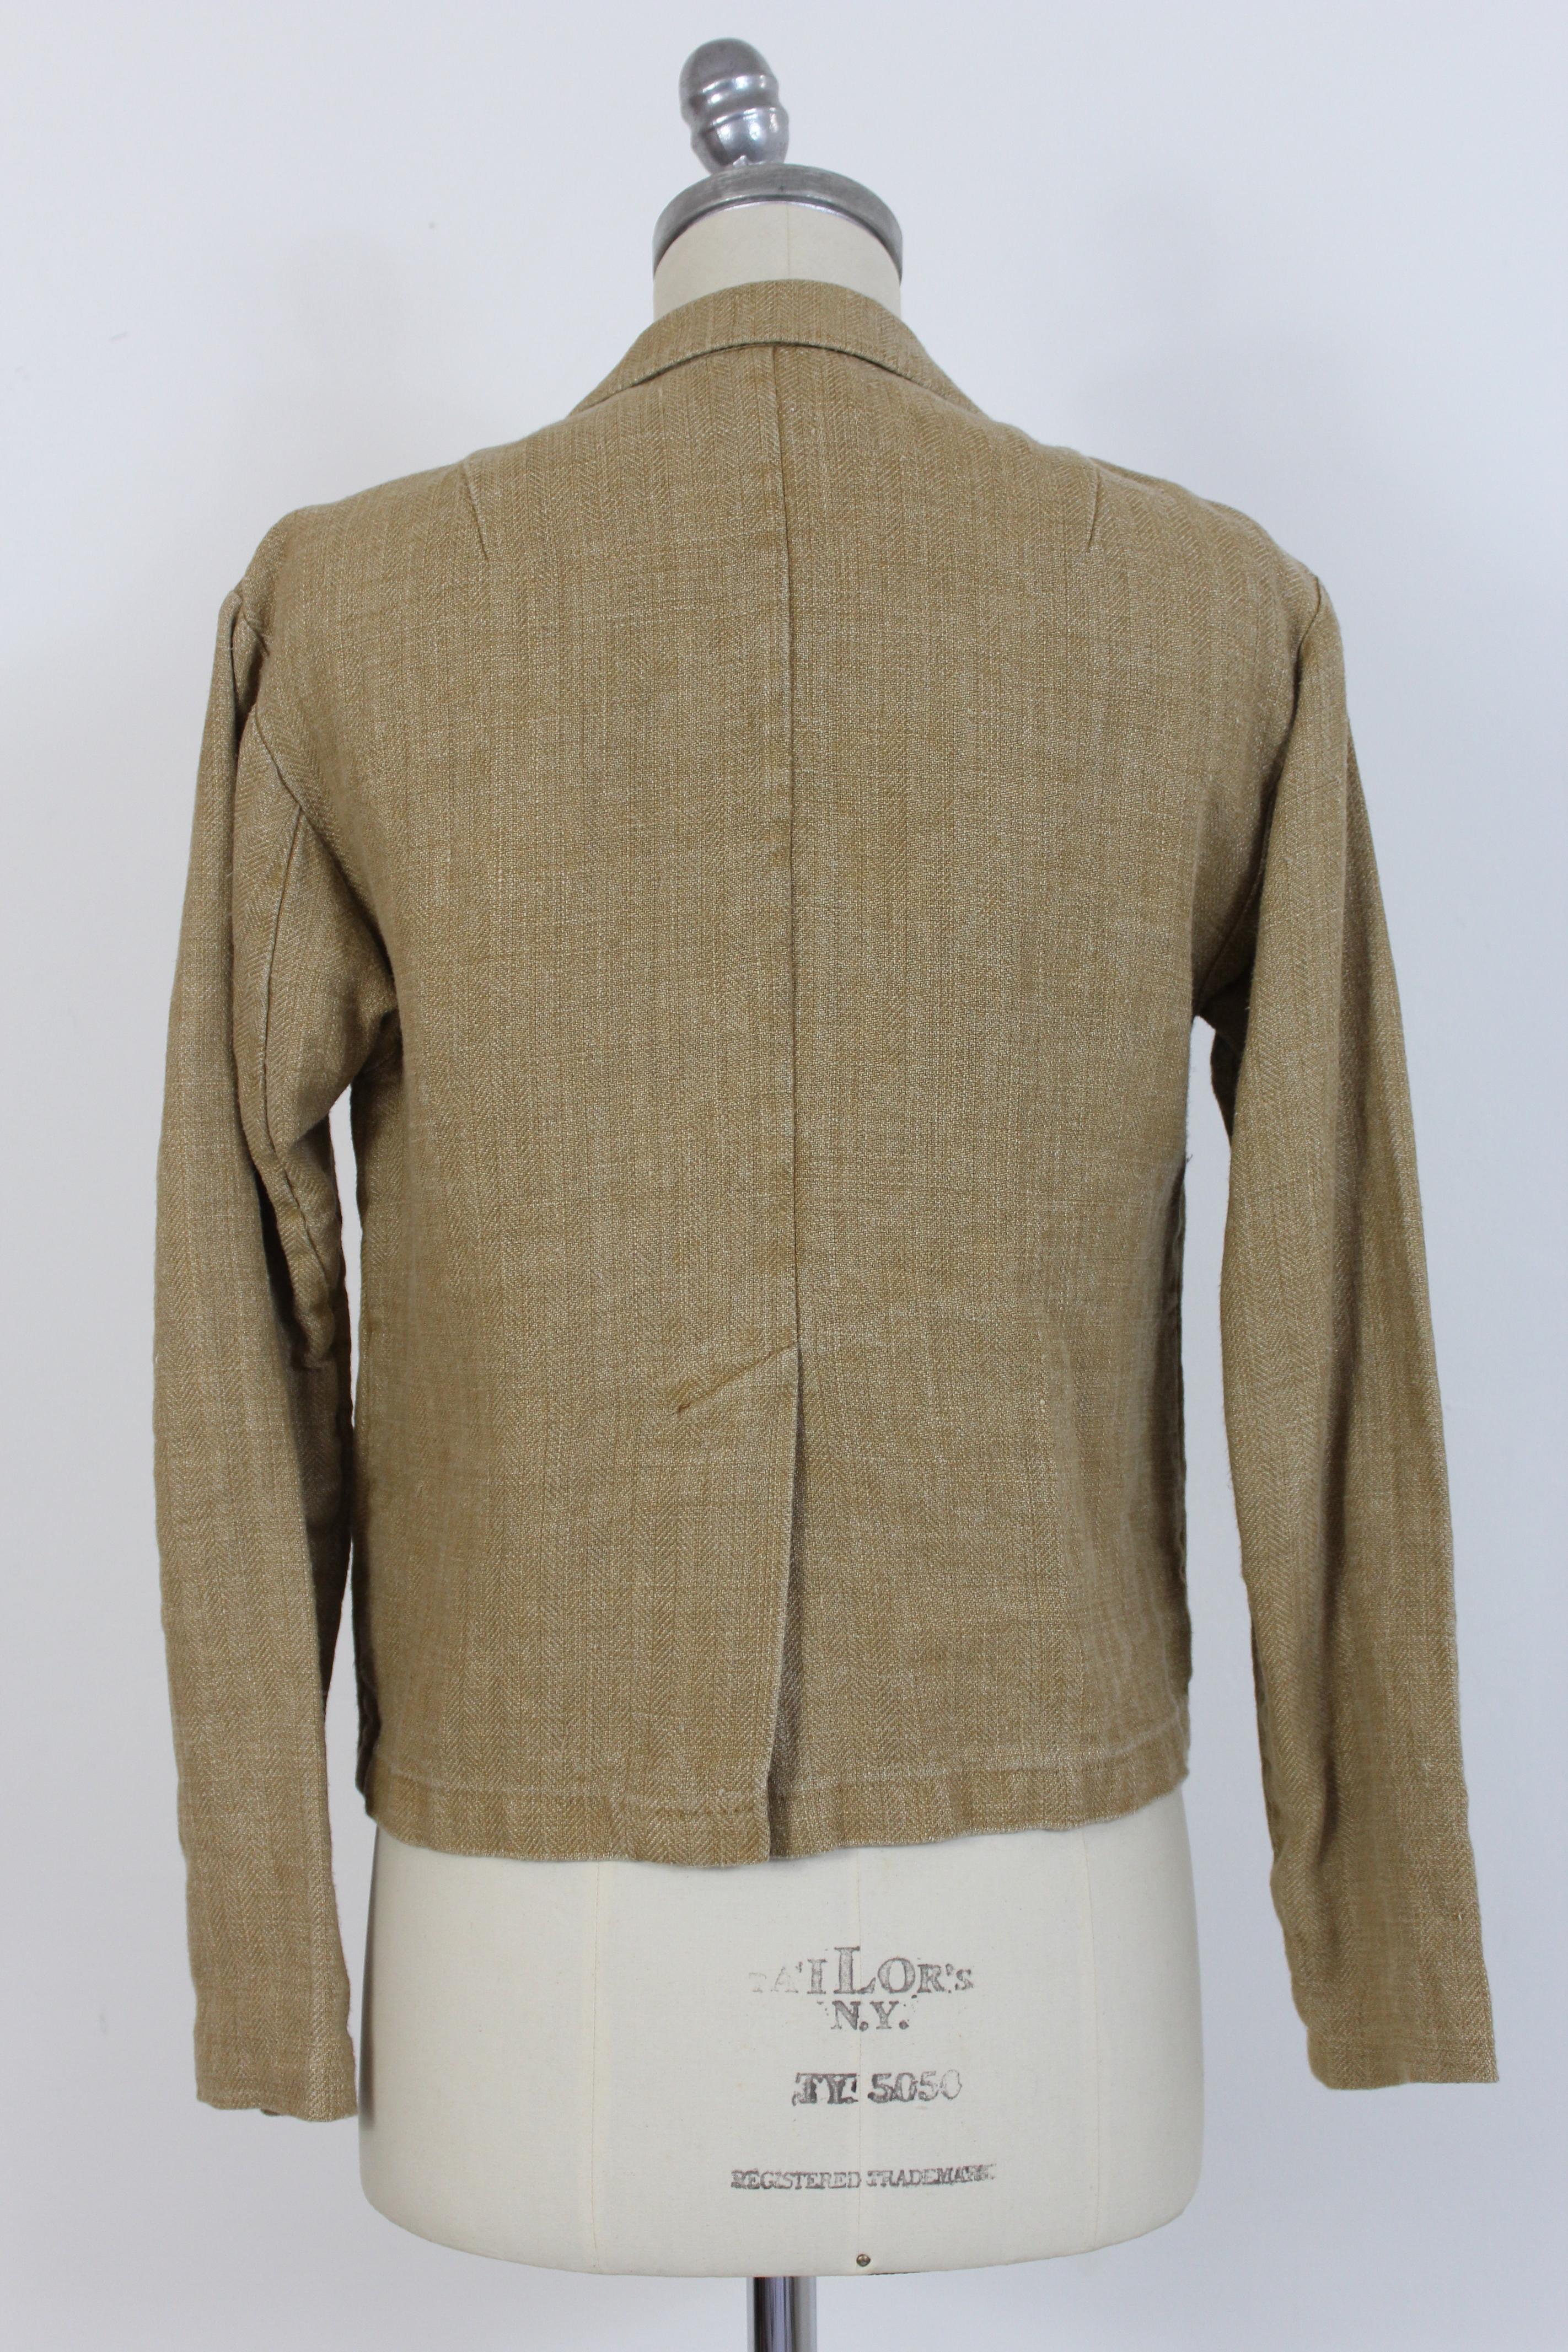 Dries Van Noten 90s vintage women's jacket. Casual jacket, one button closure. Beige color, 100% linen fabric. Made in Belgium.

Condition: Excellent

Article used few times, it remains in its excellent condition. There are no visible signs of wear,